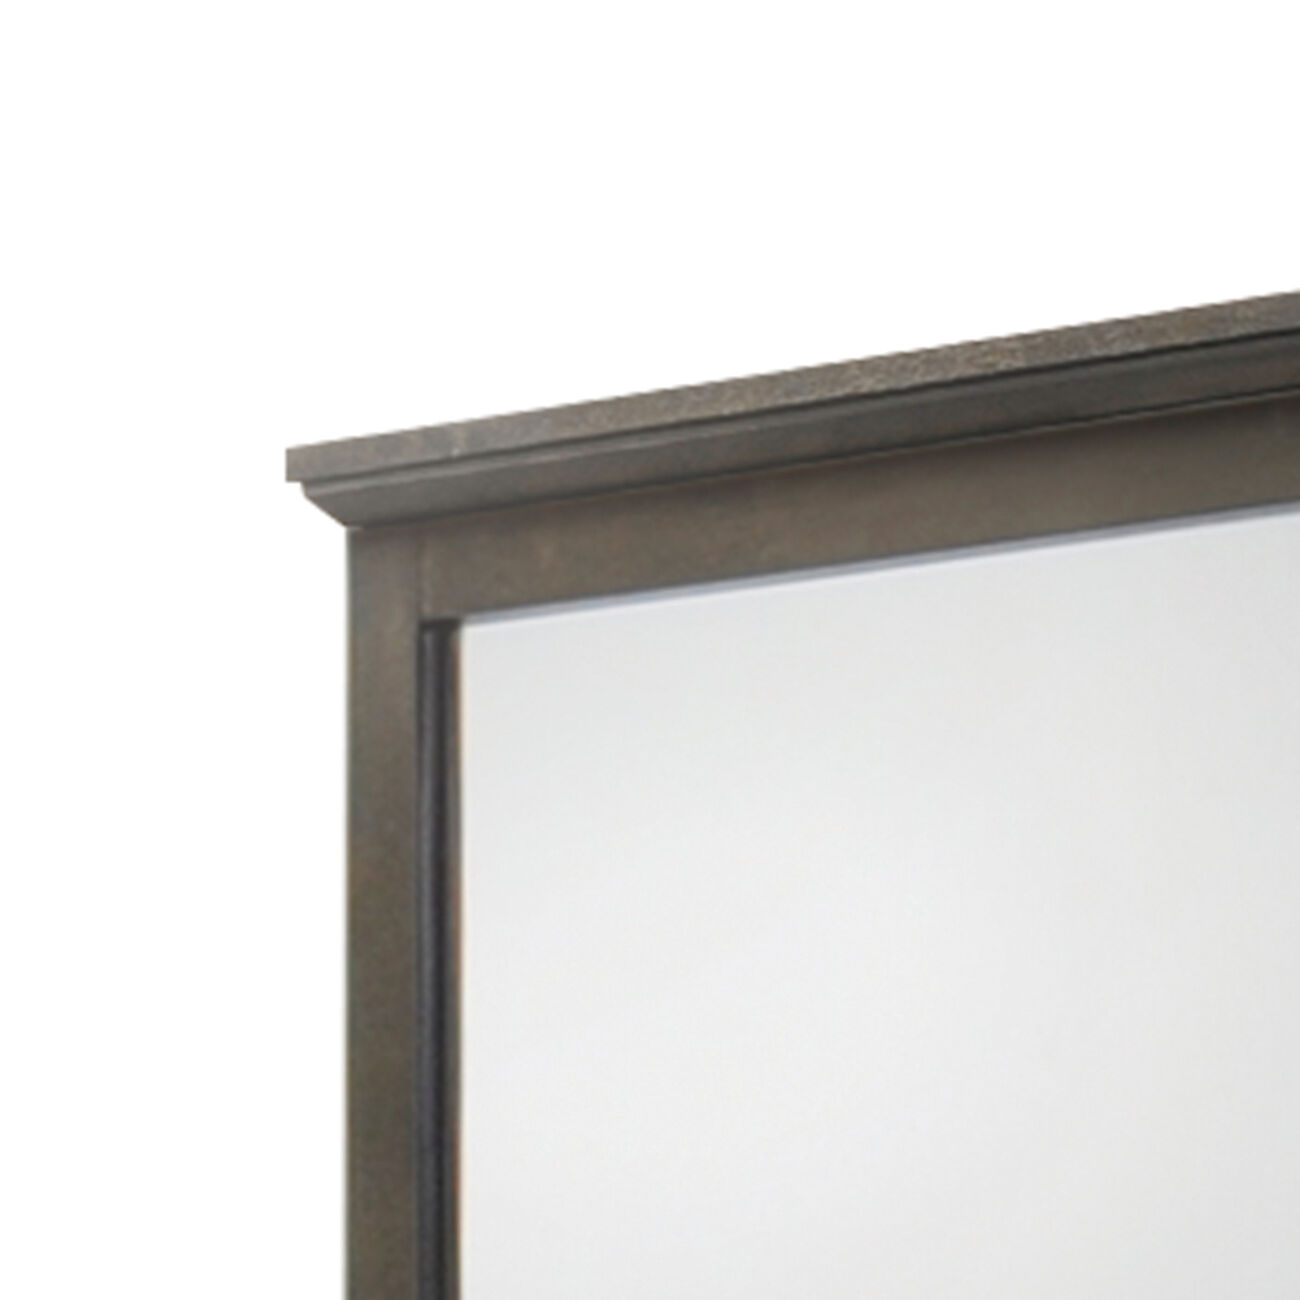 Square Wooden Frame Mirror with Raised Moulded Top, Brown and Silver